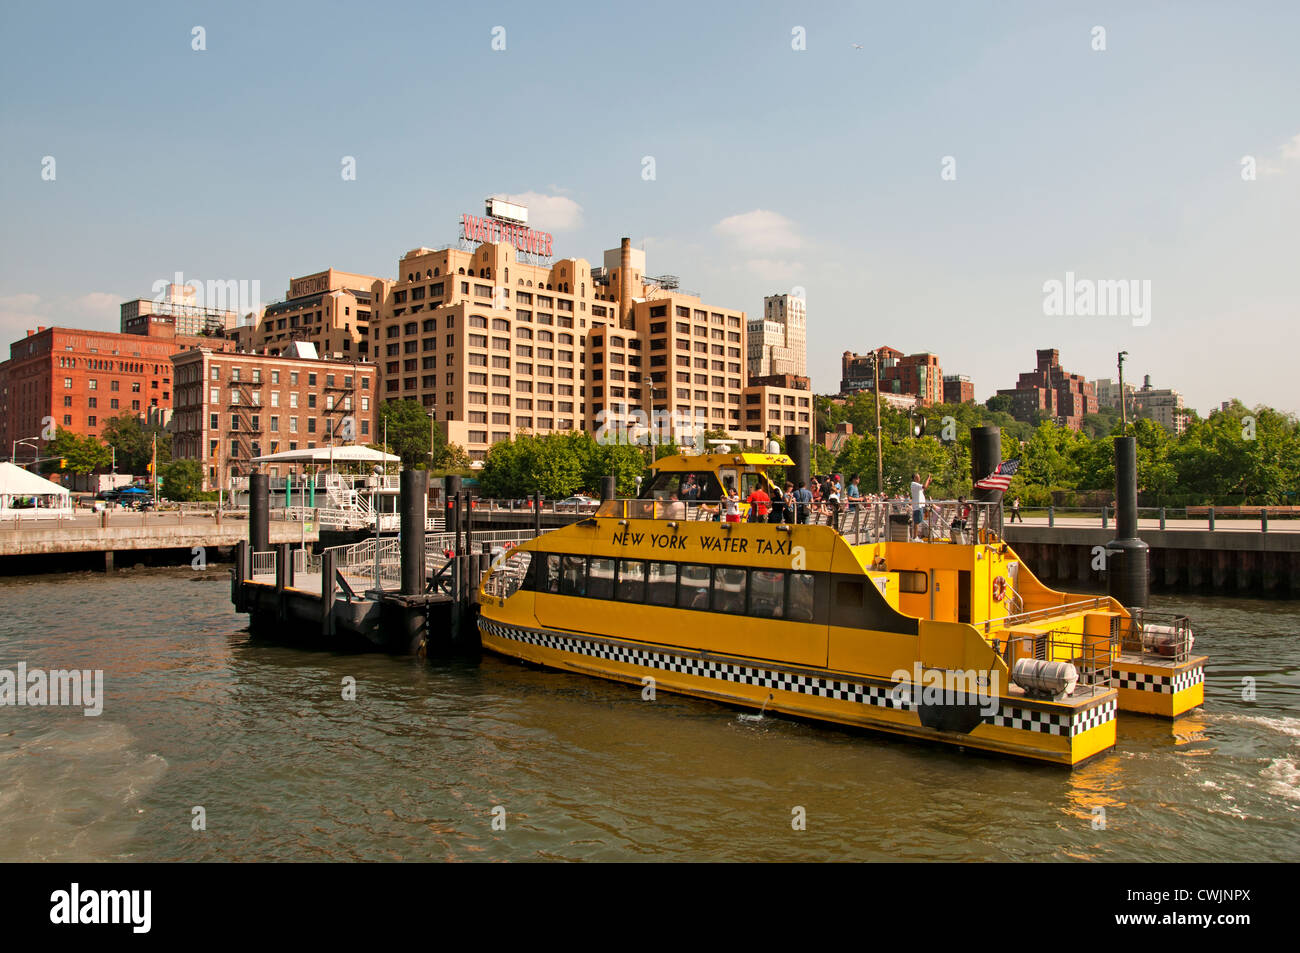 Fulton Ferry Landing Brooklyn Bridge East River, New York City United States Banque D'Images